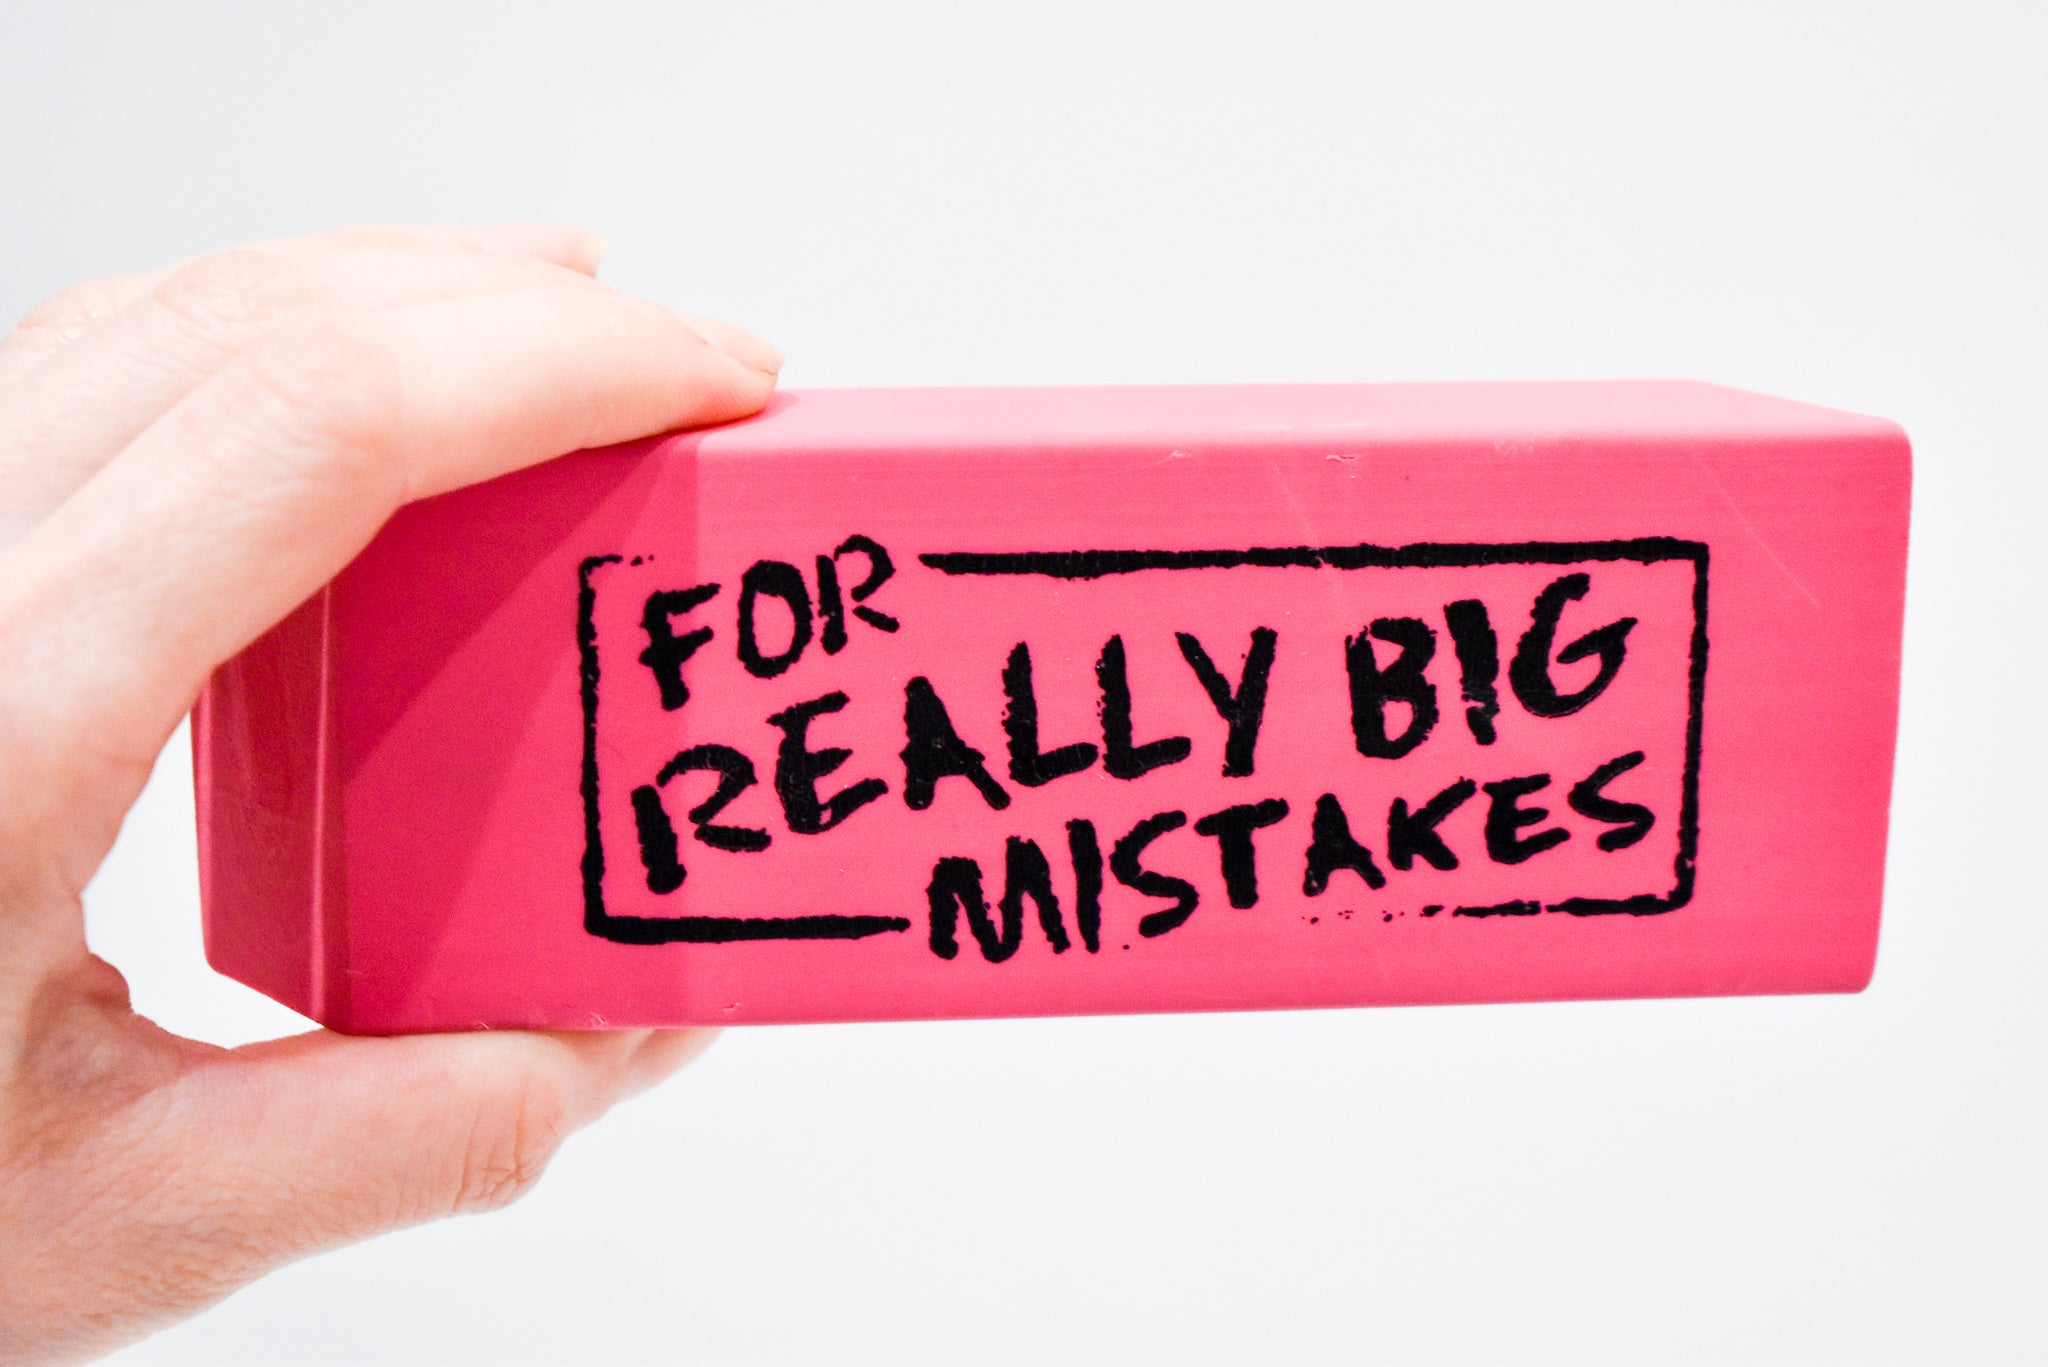 For Really Big Mistakes Eraser